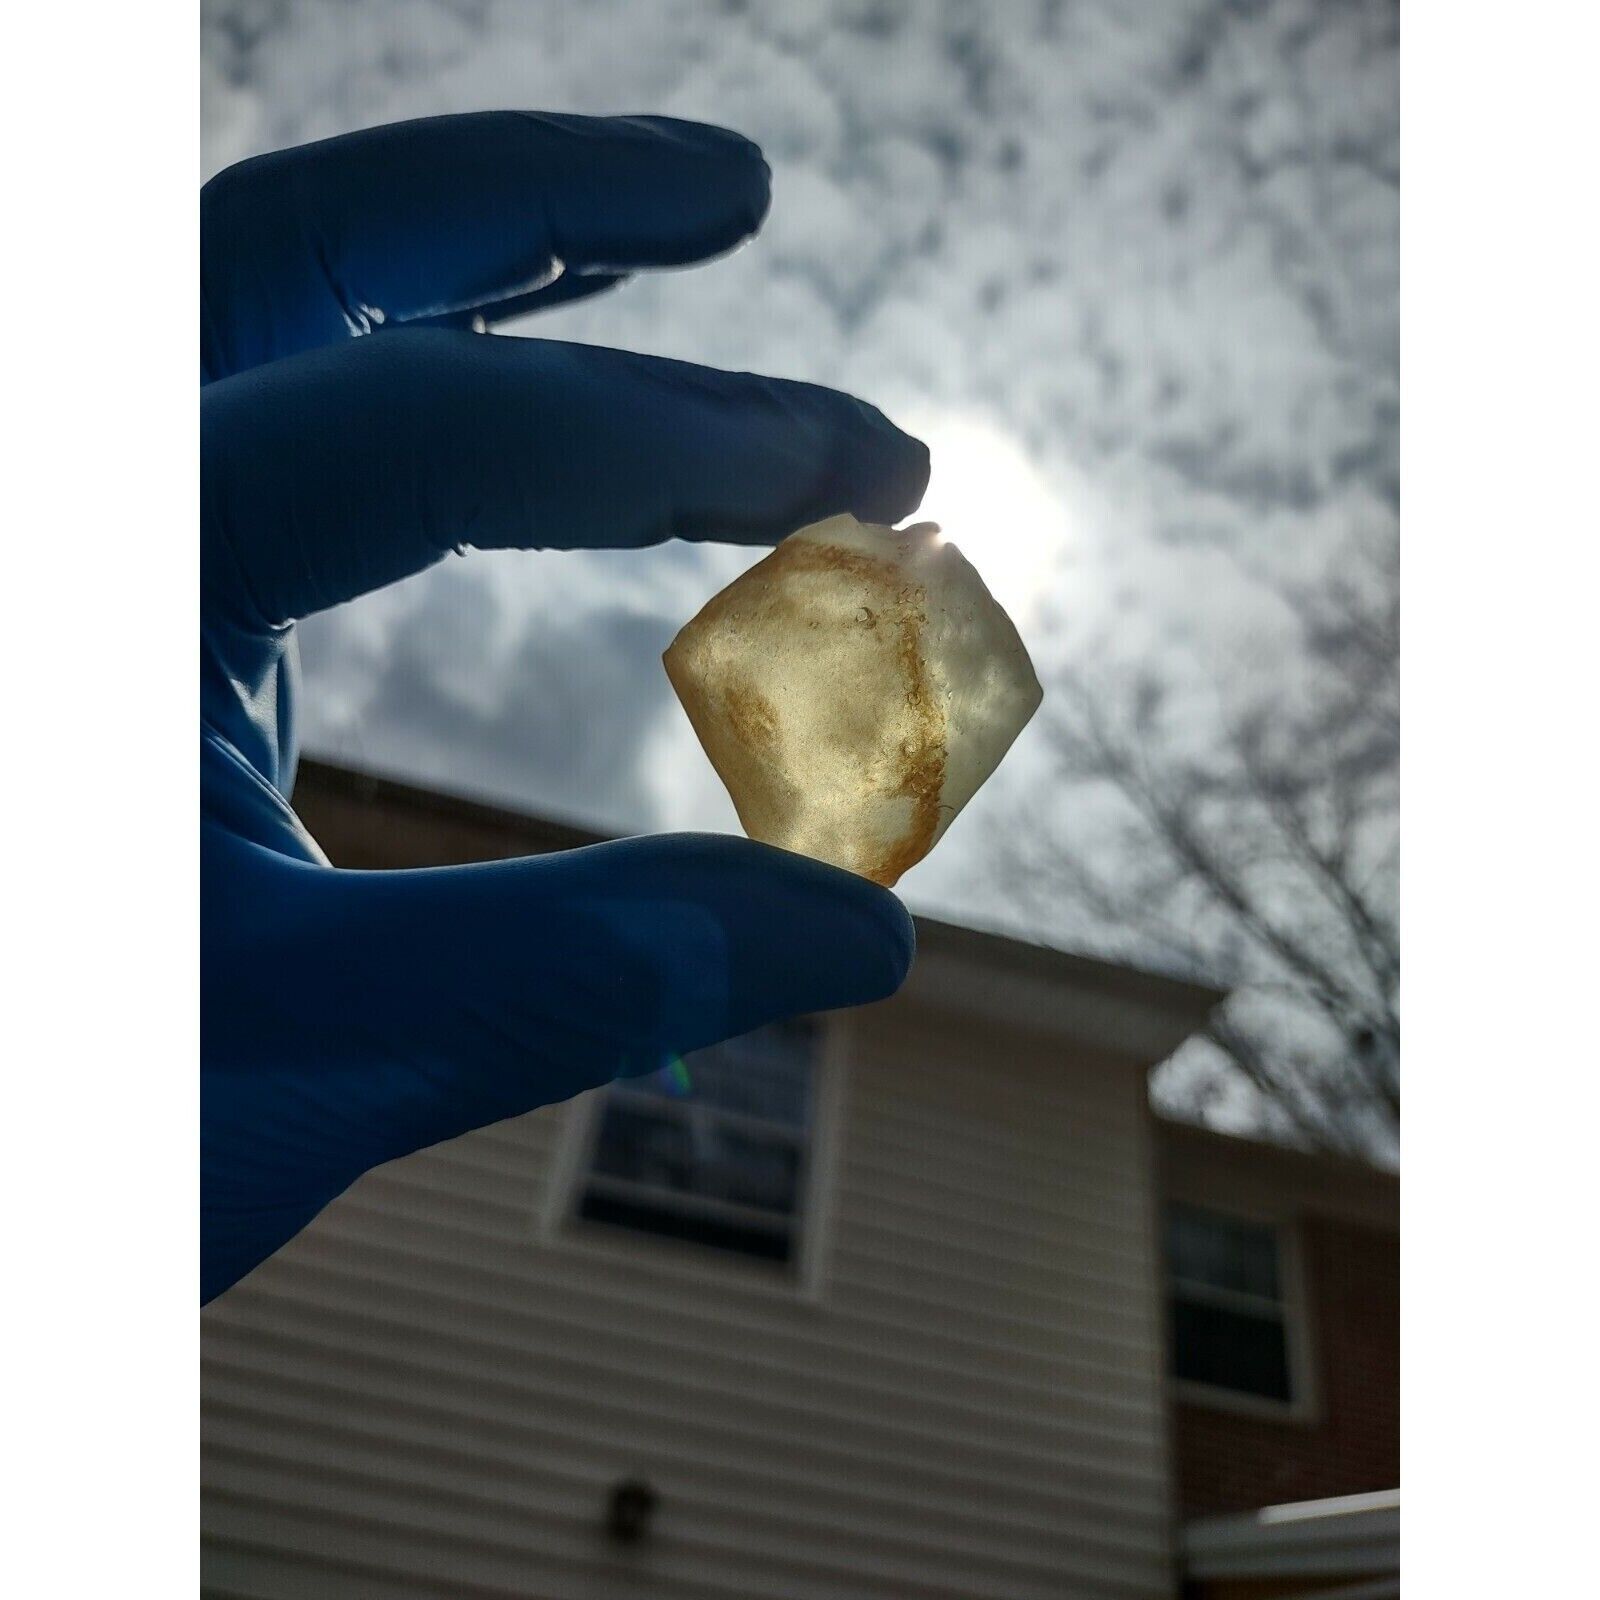 AAA+ museum quality The VERY BEST Natural Libyan Desert Glass 225ct